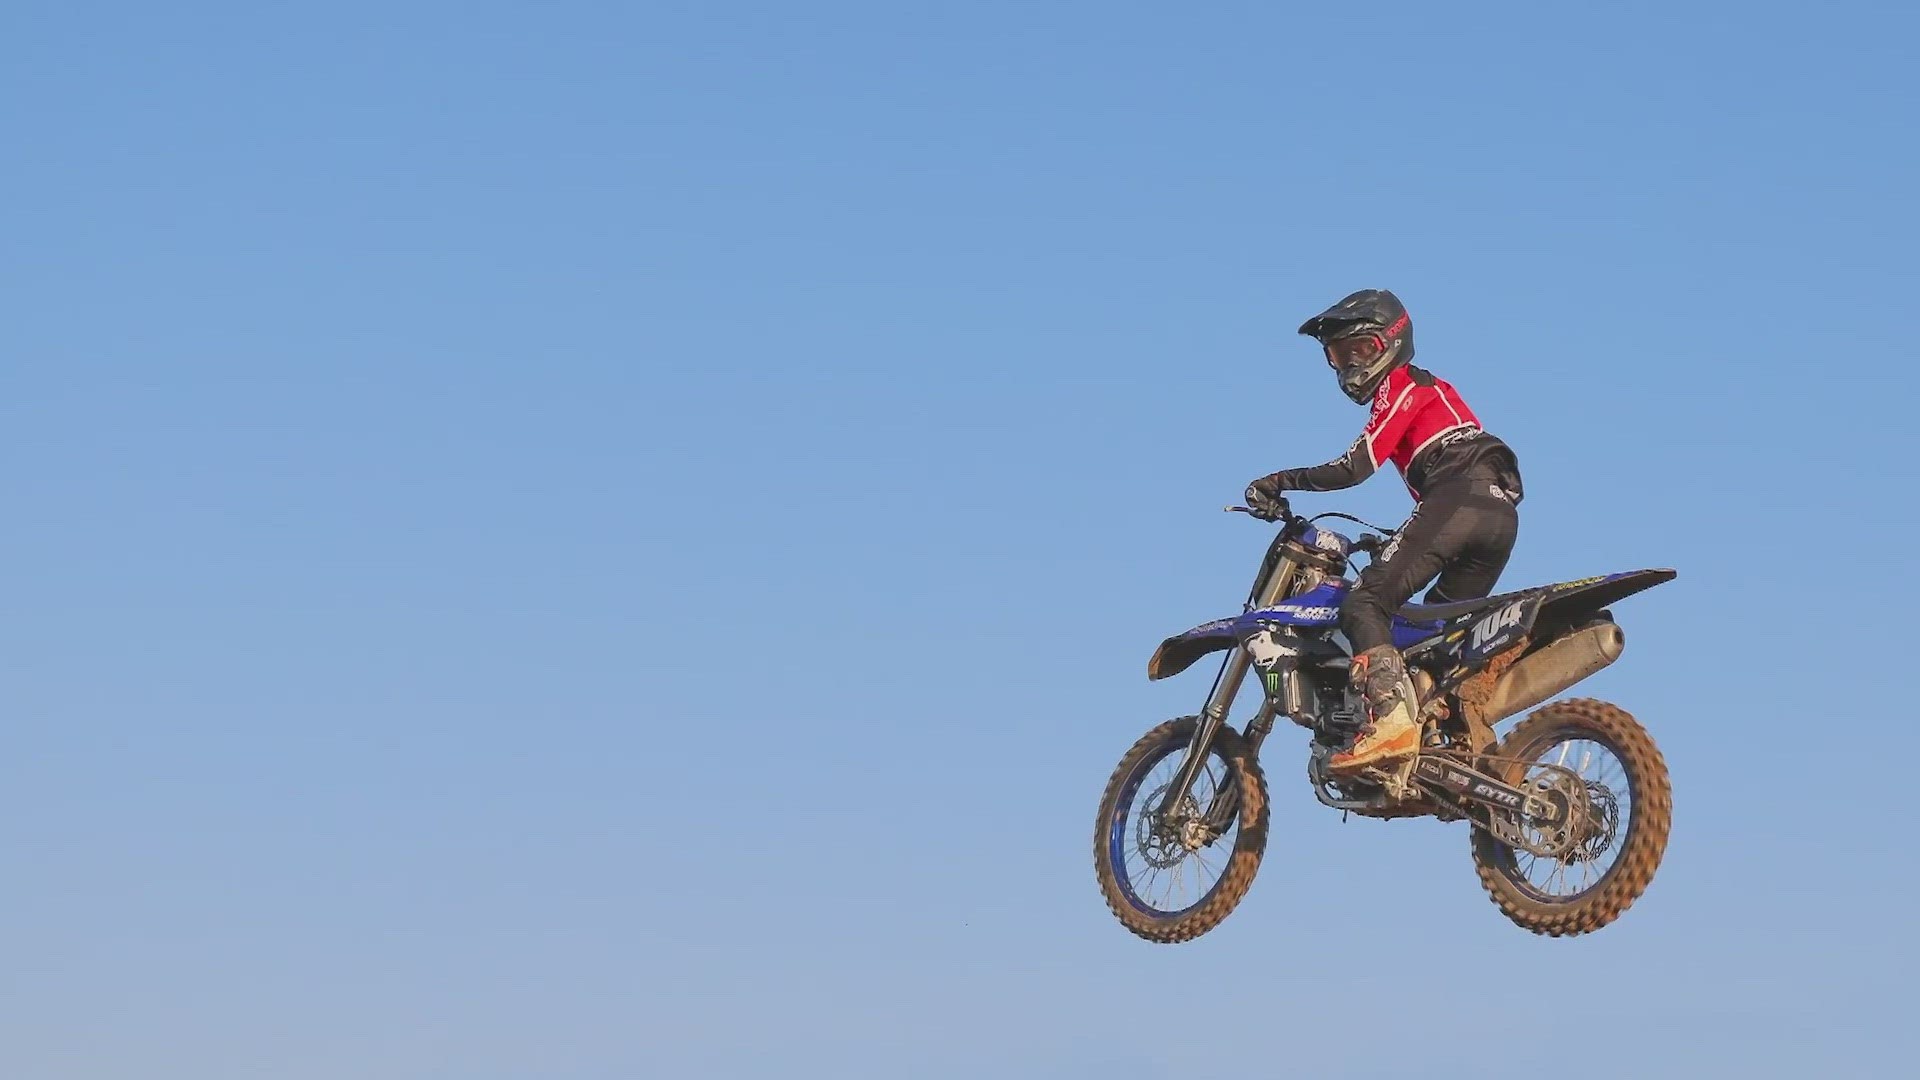 Moses Smith fell in love with motocross in Africa. After an accident in Texas, he's back on his bike with a new look at life.